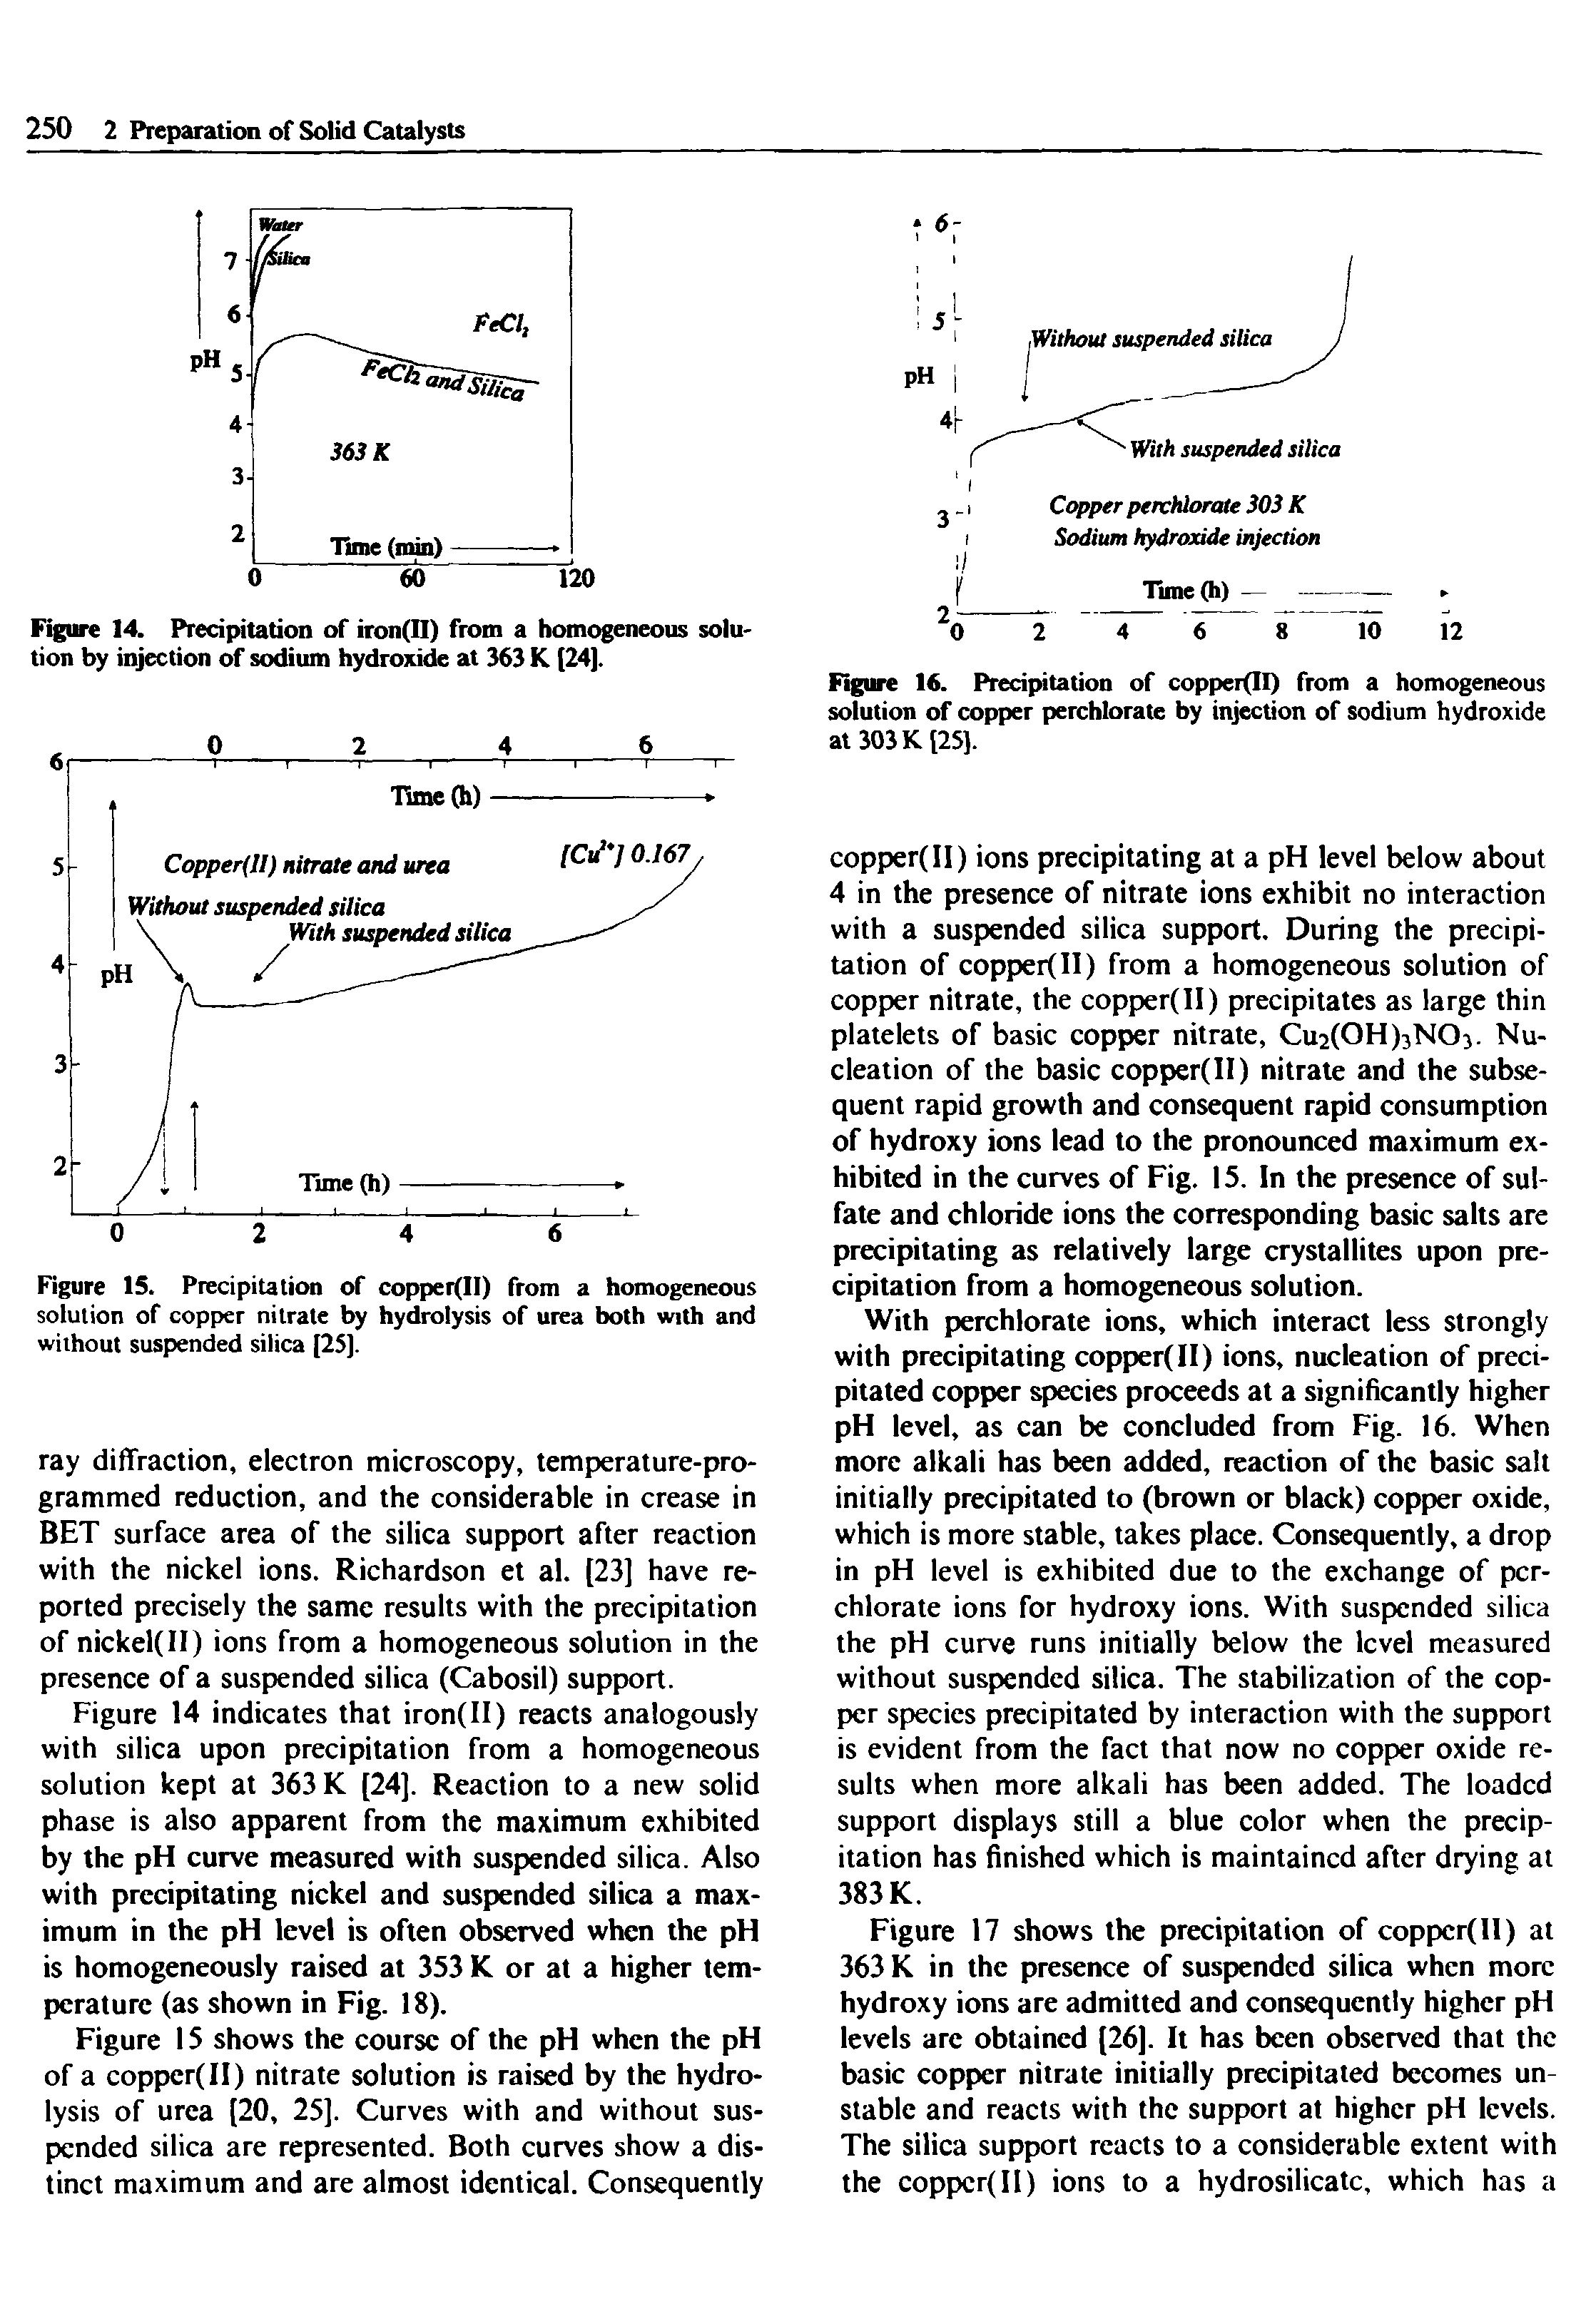 Figure 16. Precipitation of copperfll) from a homogeneous solution of copper perchlorate by injection of sodium hydroxide at 303 K [25].